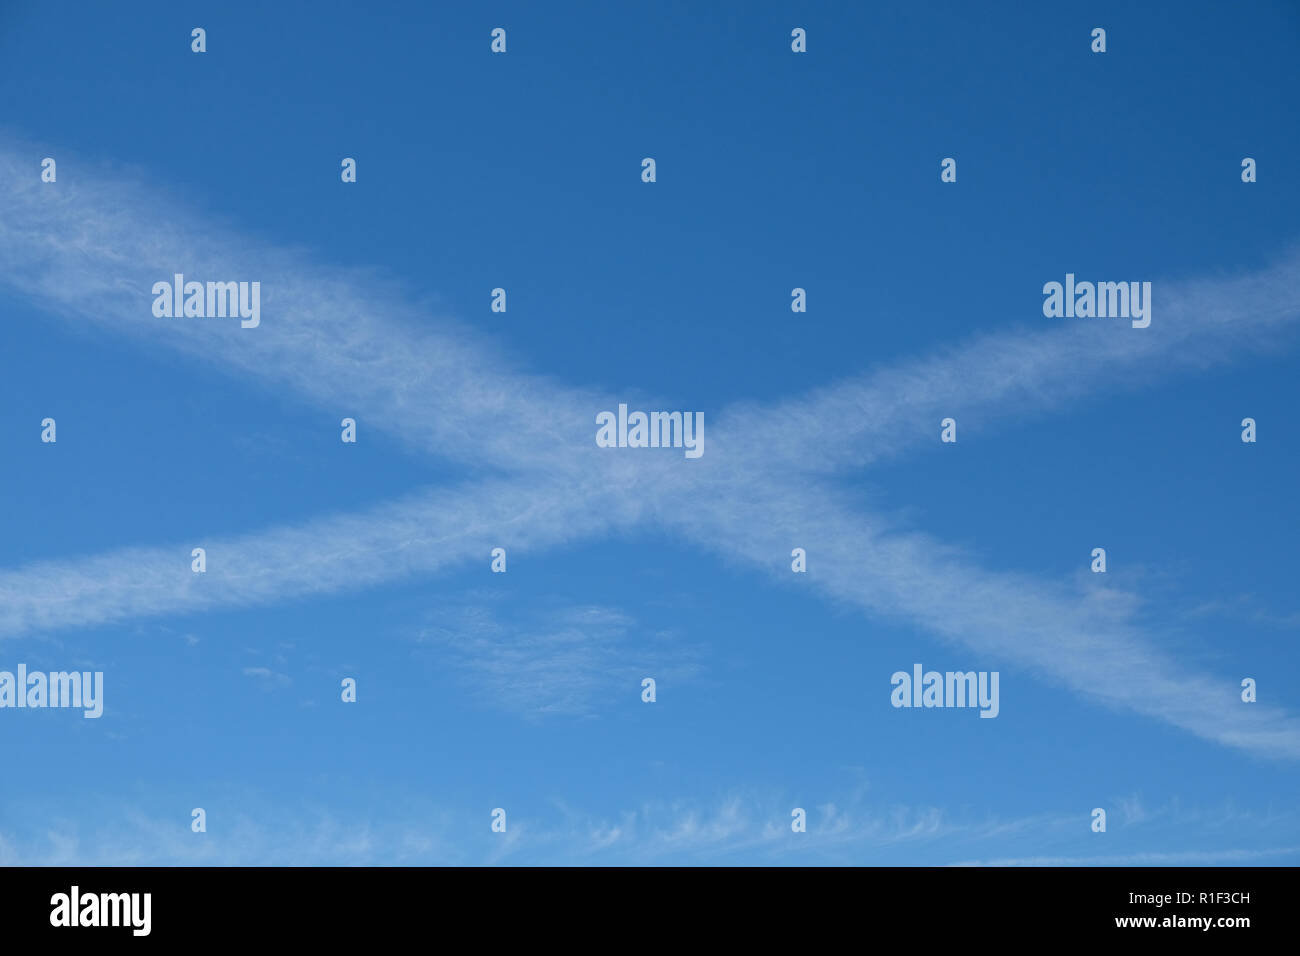 Saint Andrews cross in the sky formed from vapour trails of high flying aircraft. Stock Photo